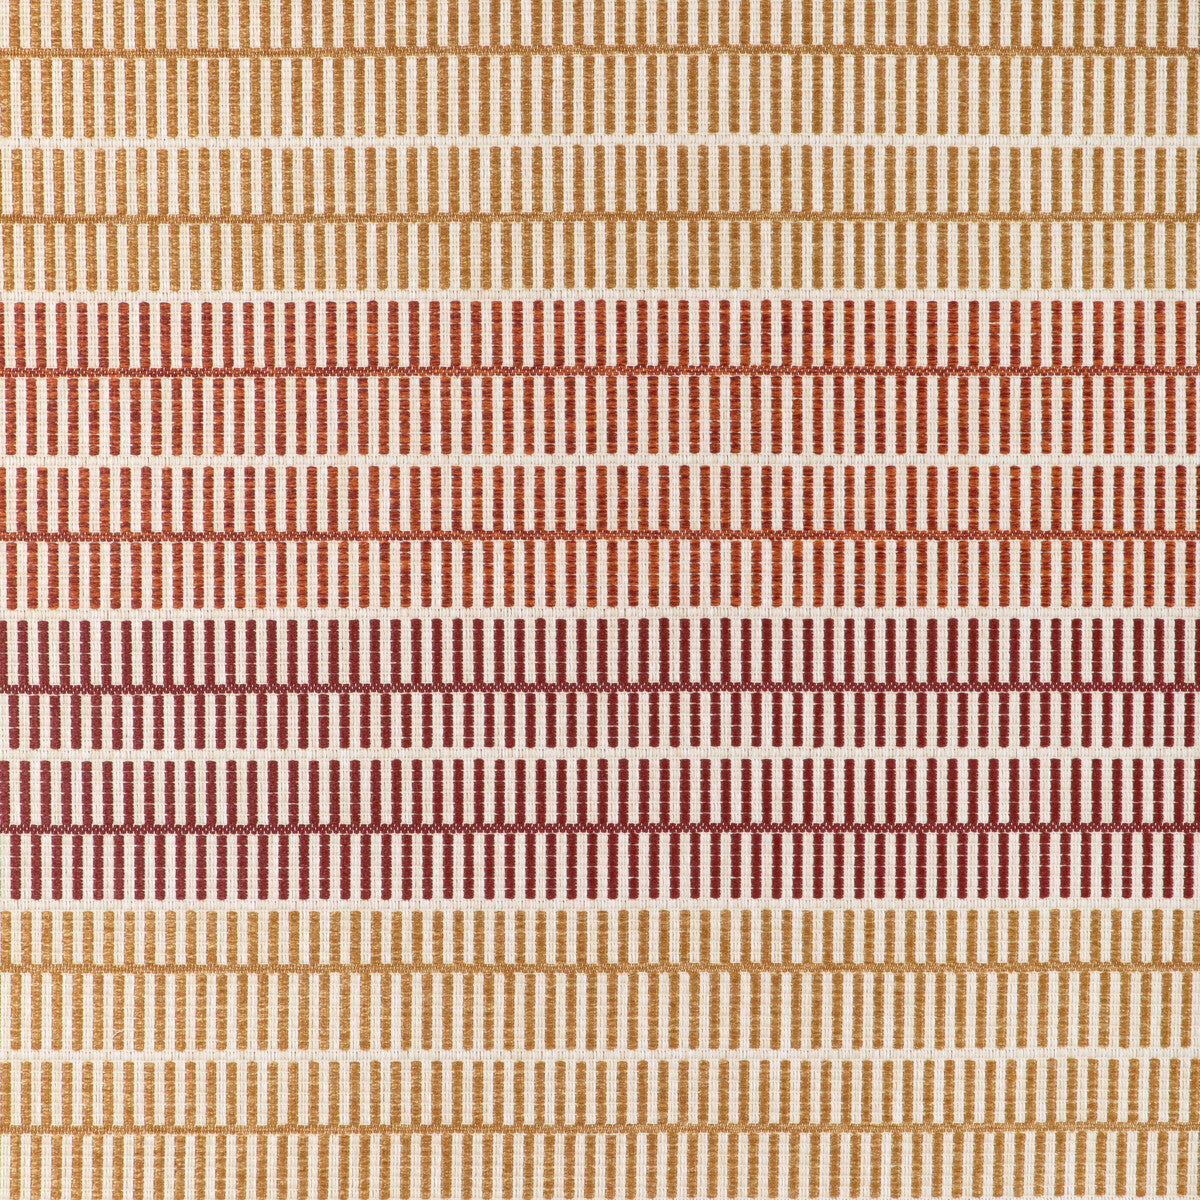 Les Oliviers Weave fabric in spice color - pattern 8024117.924.0 - by Brunschwig &amp; Fils in the Les Ensembliers L&